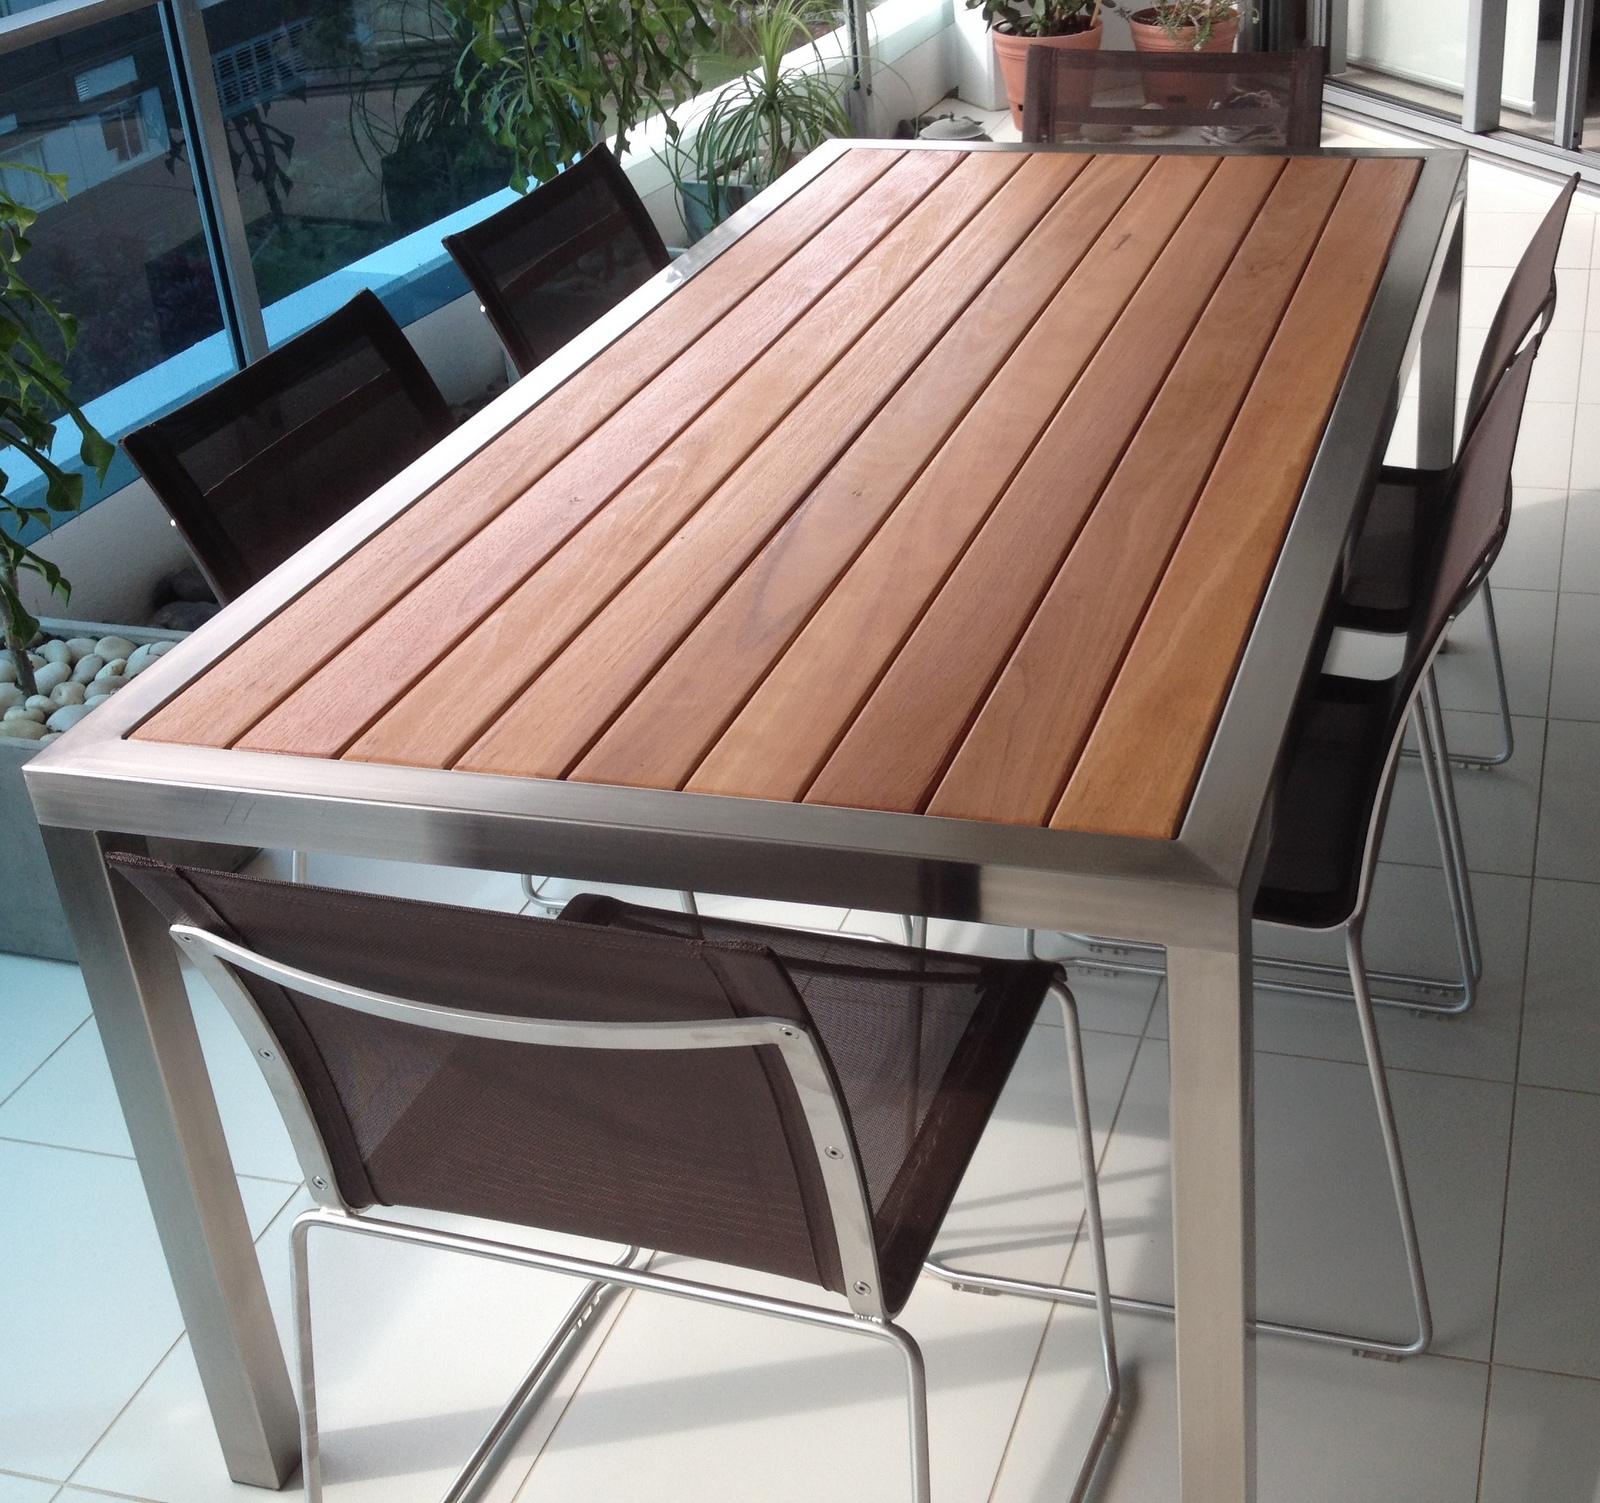 Galaxy Table with benches - Dining Tables Brisbane - AGFC